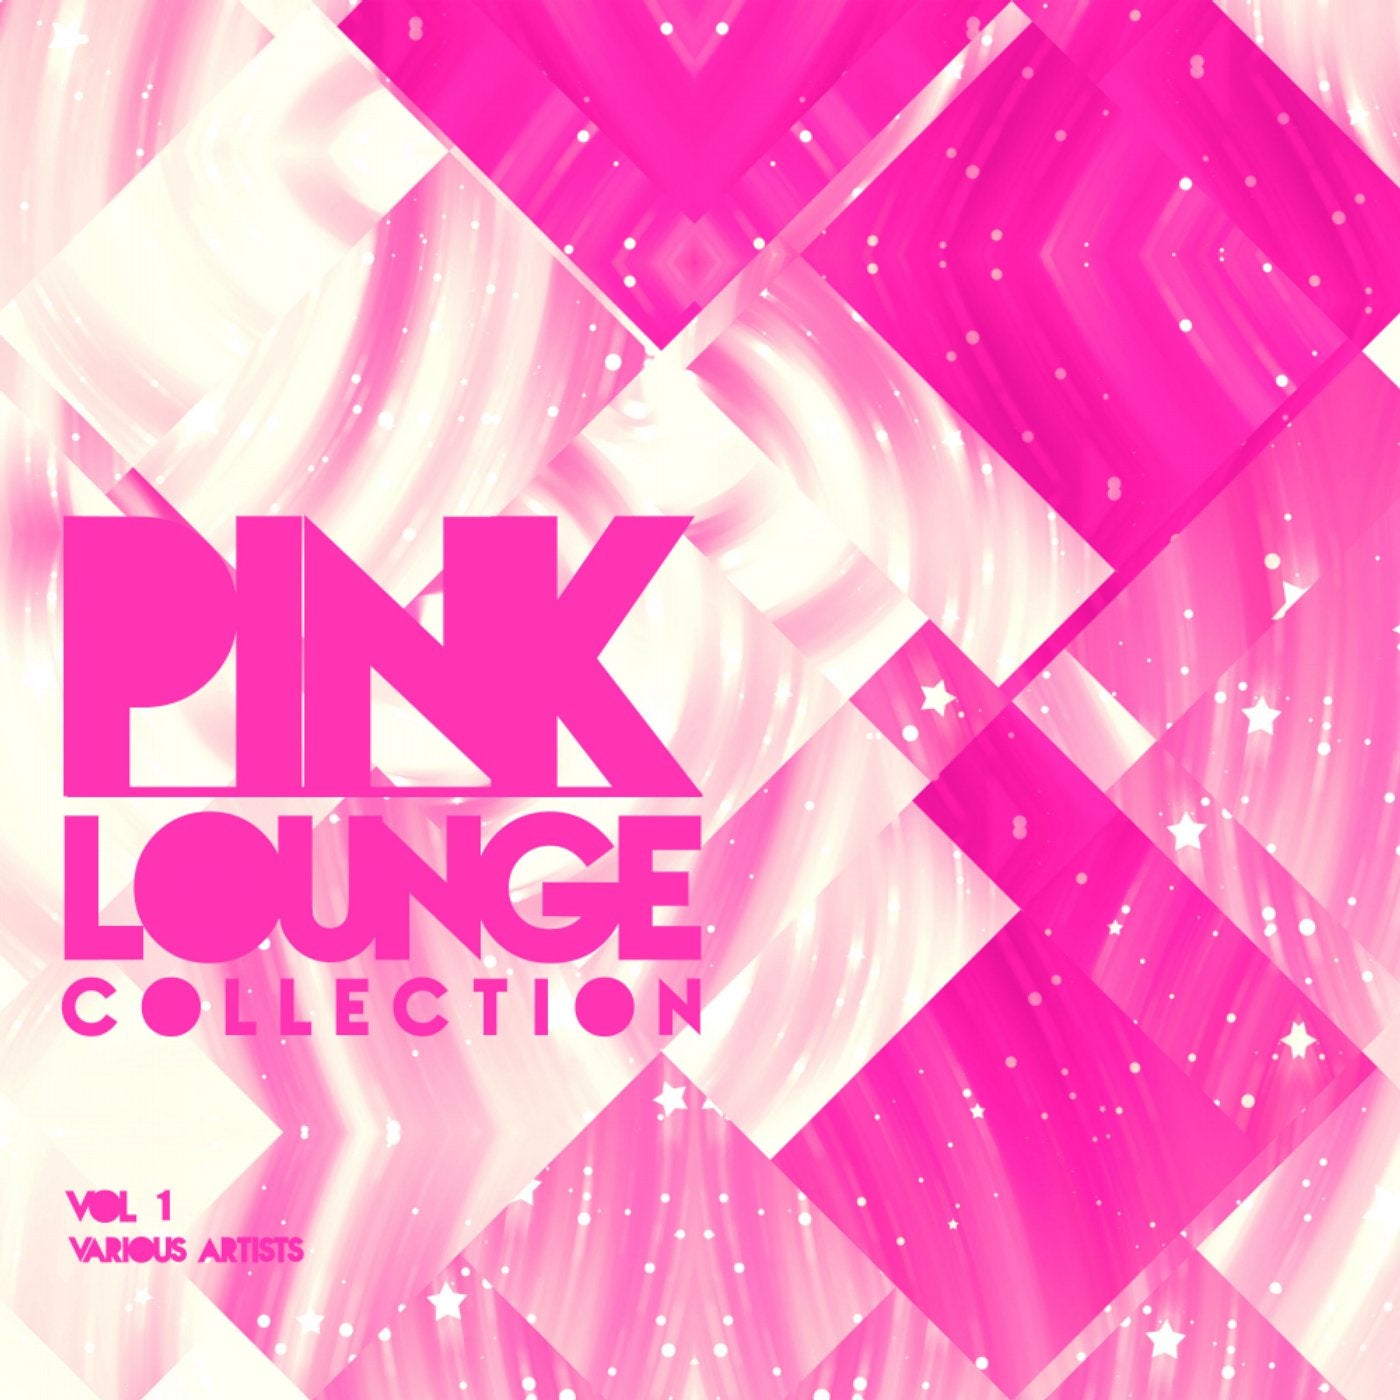 Pink Lounge Collection, Vol. 1